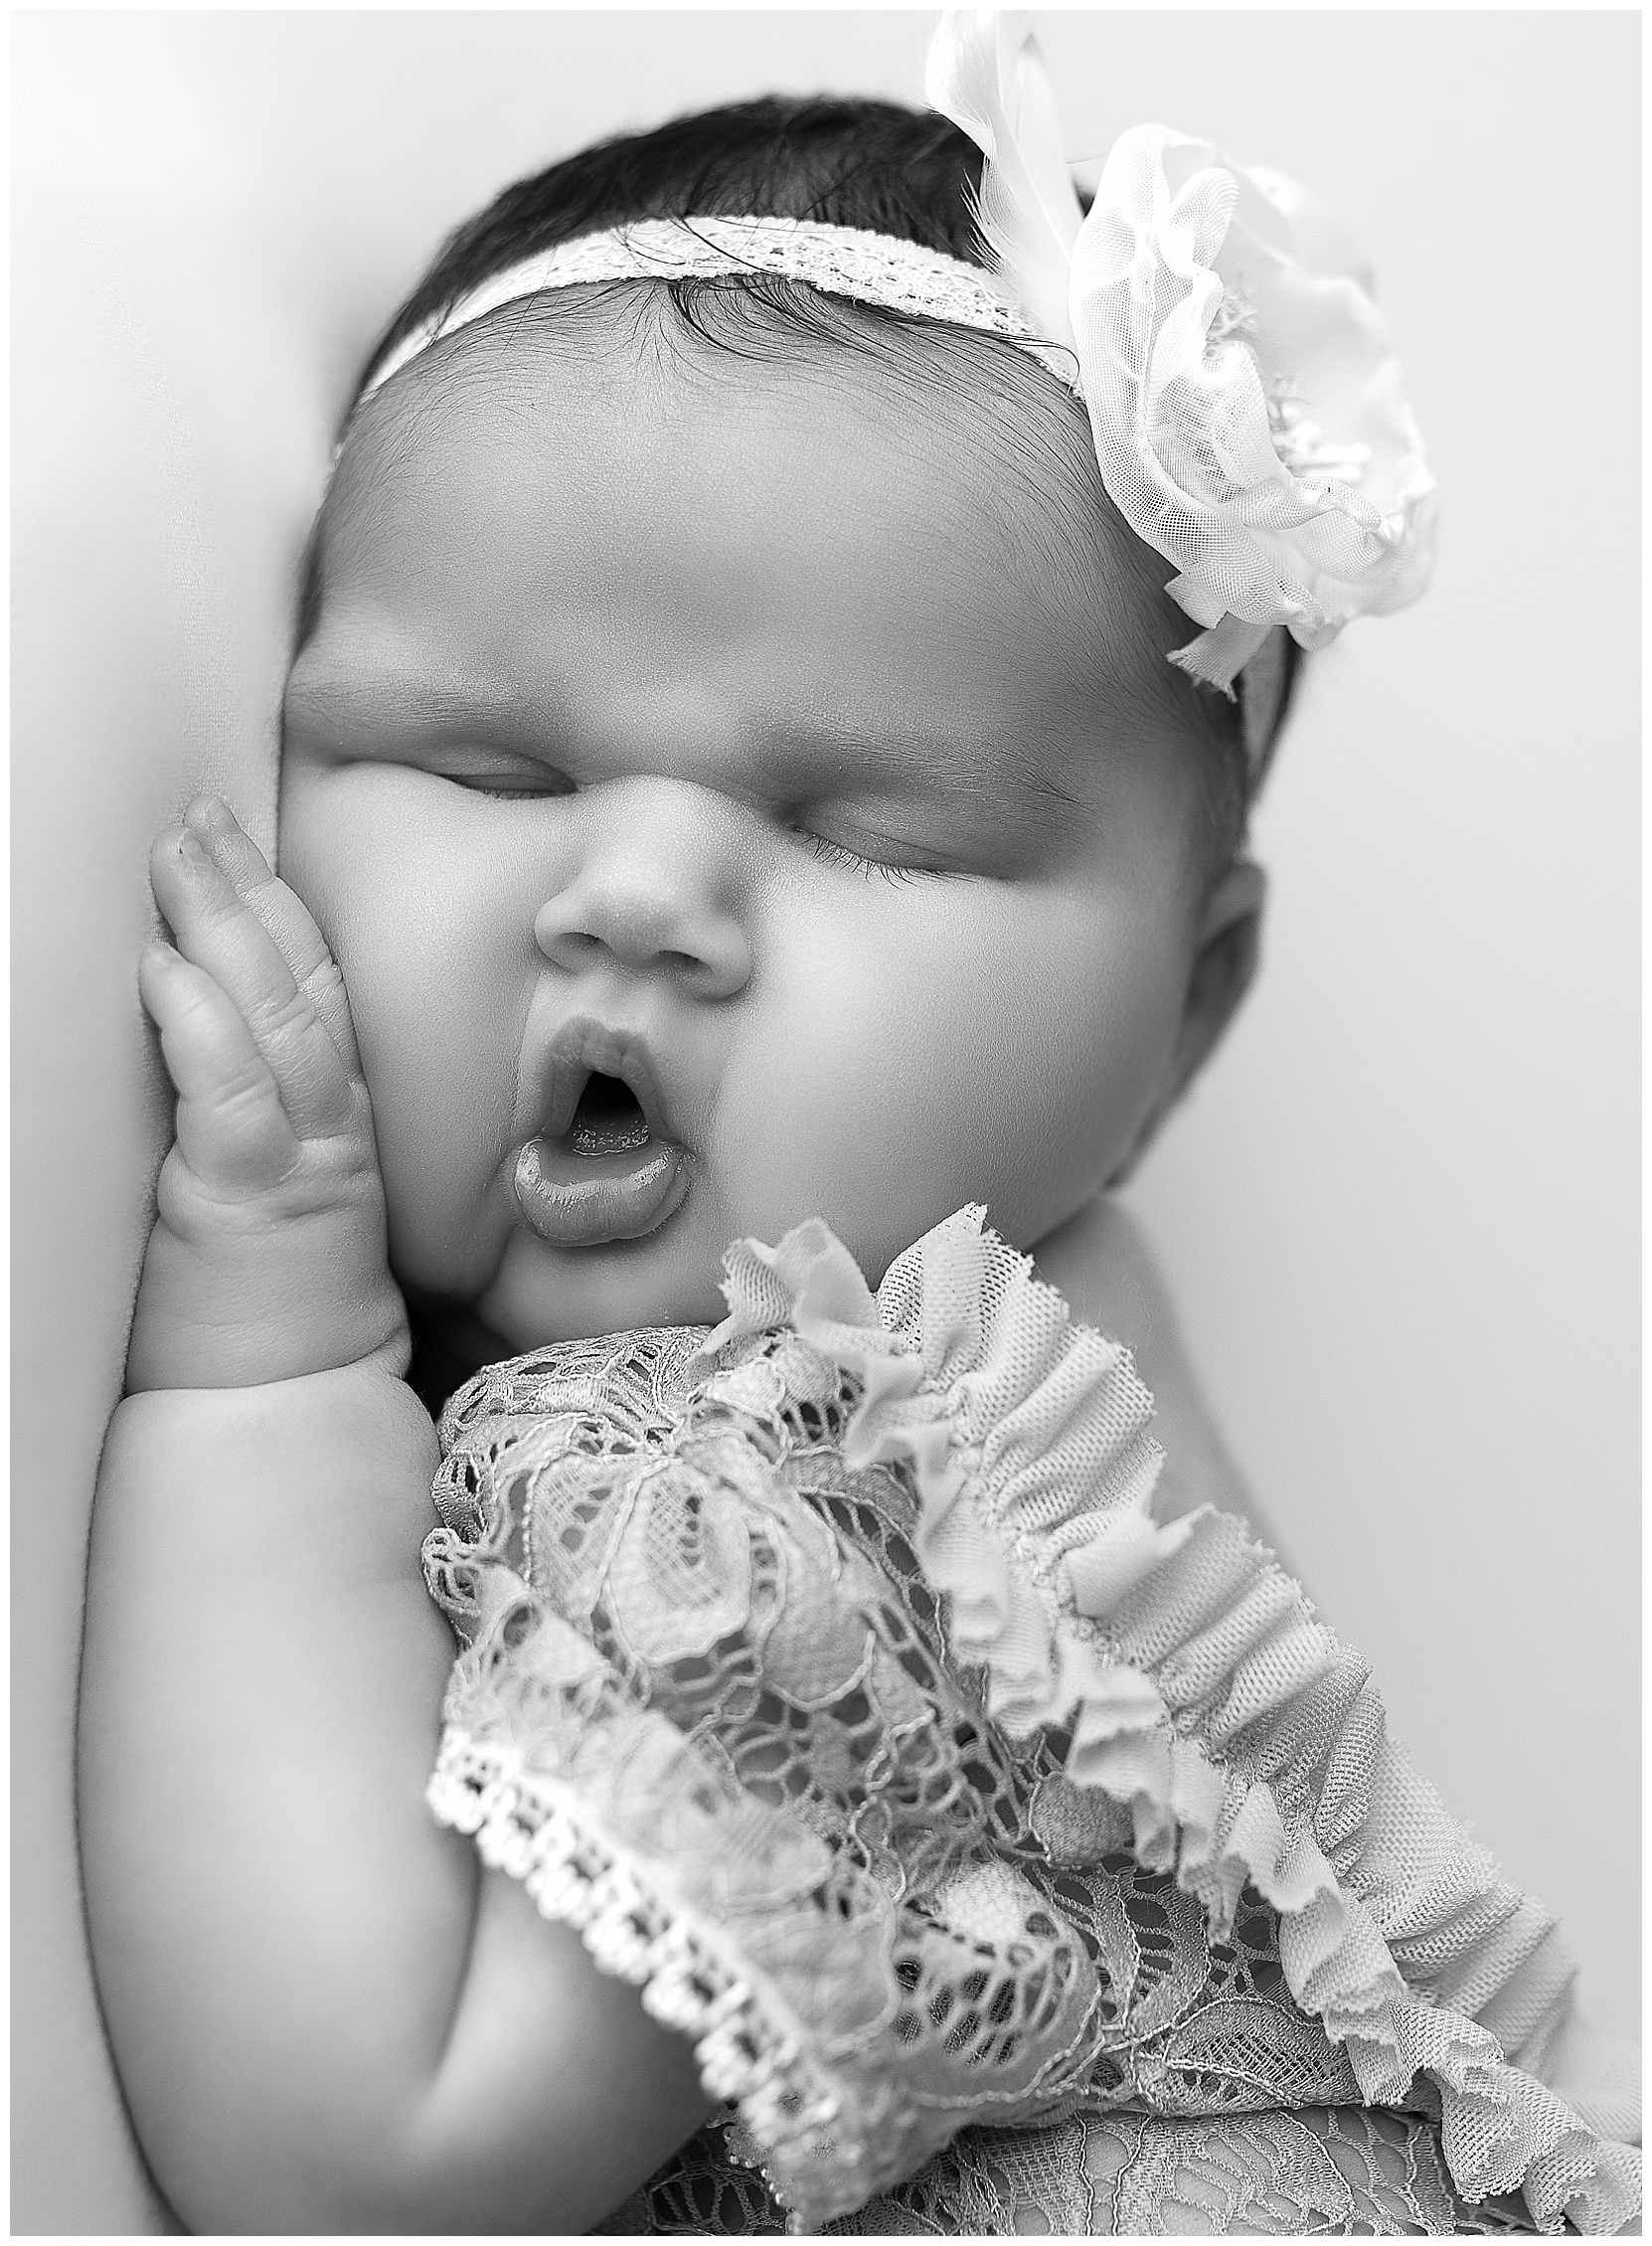 baby girl sleeping with her mouth open on a white blanket